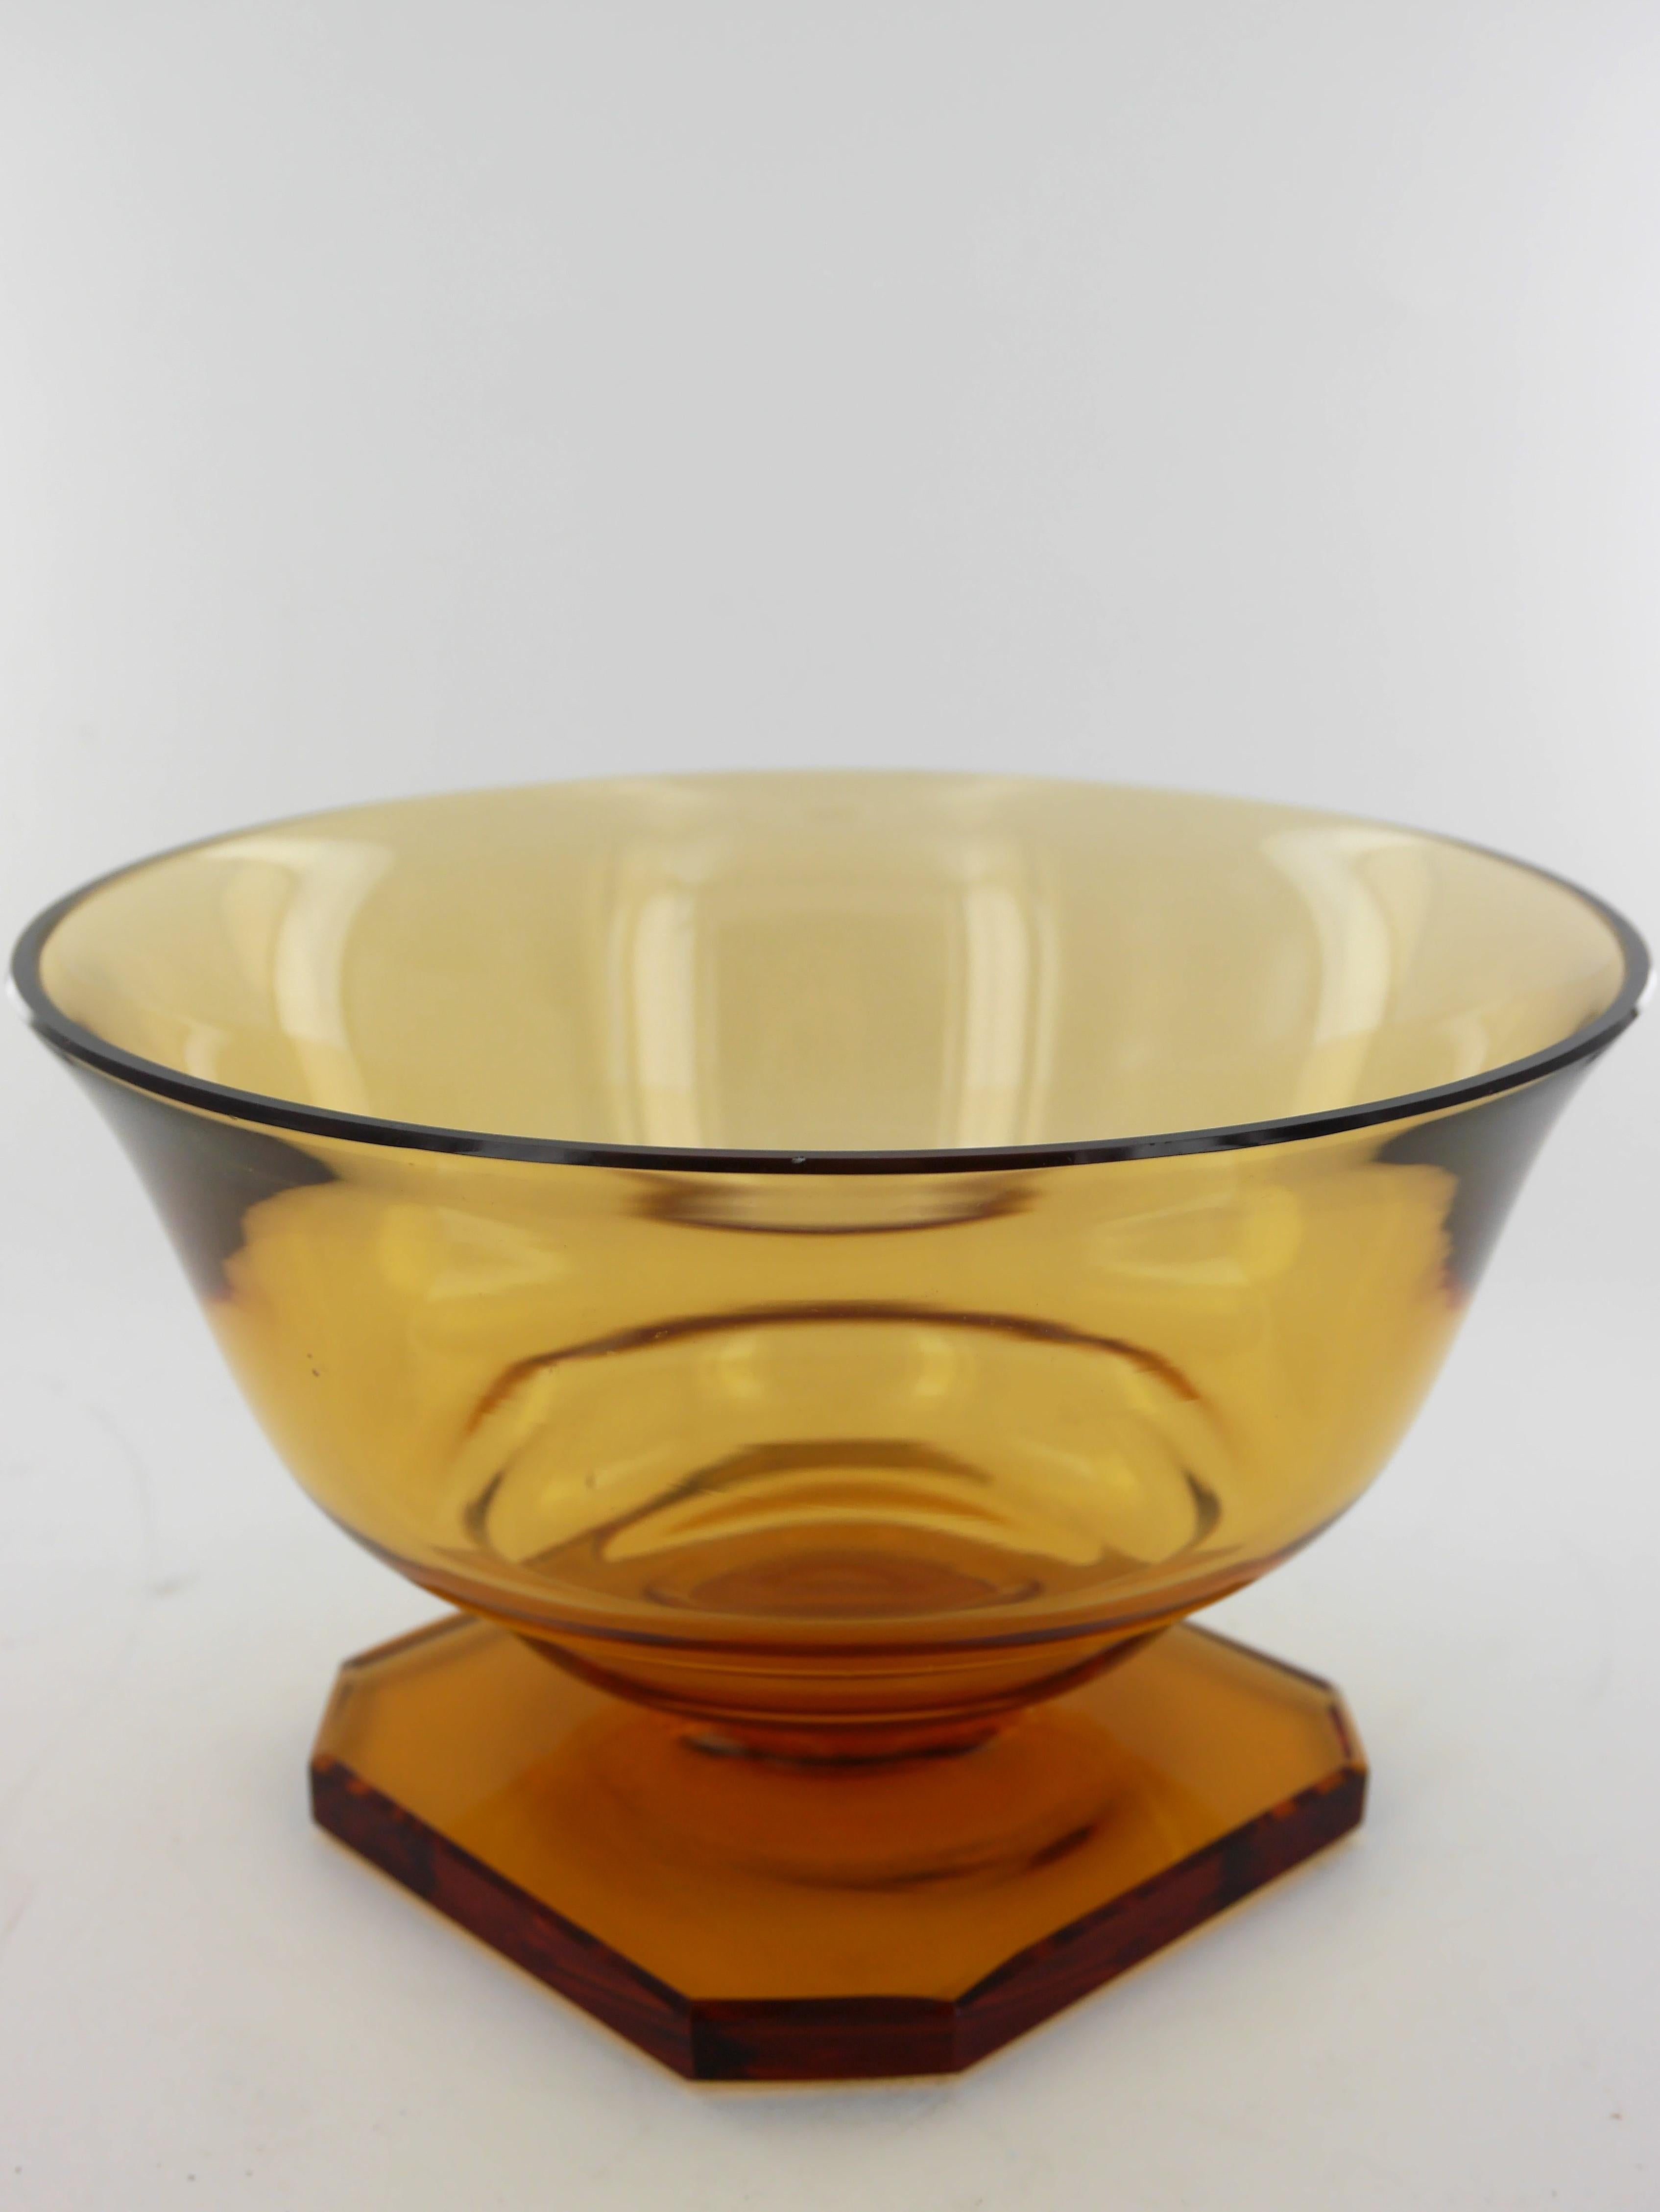 20th Century An Art Deco Large Amber Glass Vase or Serving Bowl by Daum, 1930s